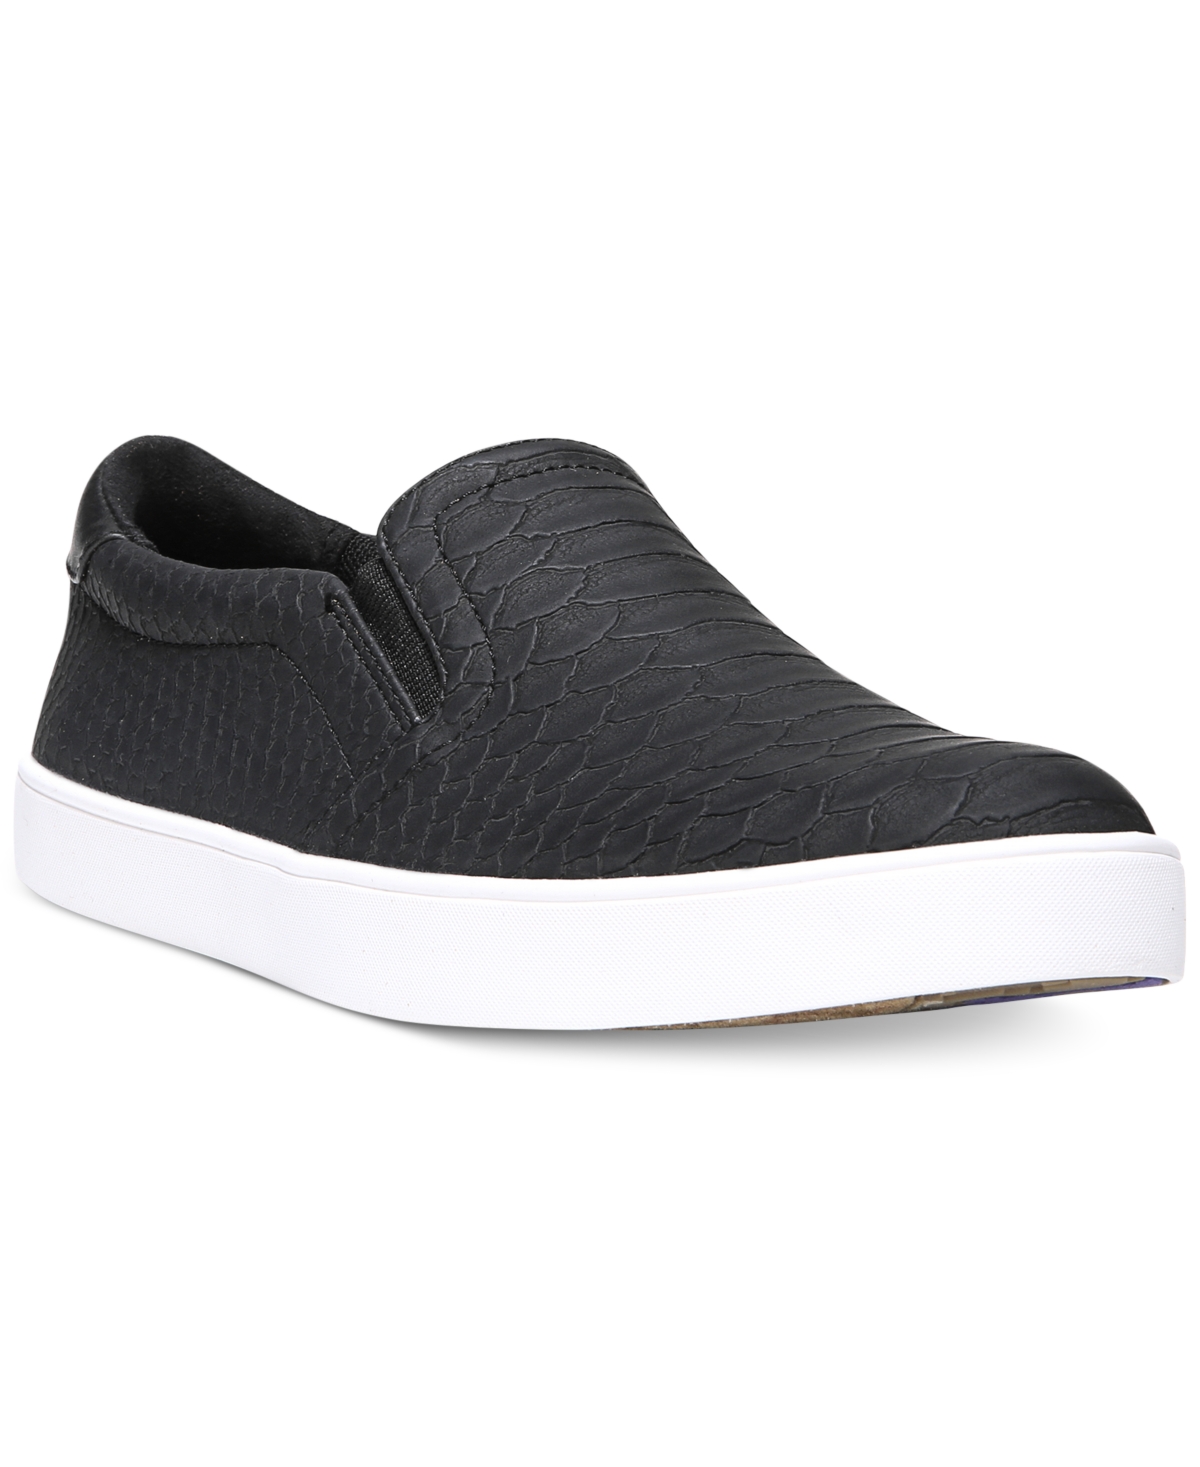 Women's Madison Slip-On Sneakers - Black Python Faux Leather